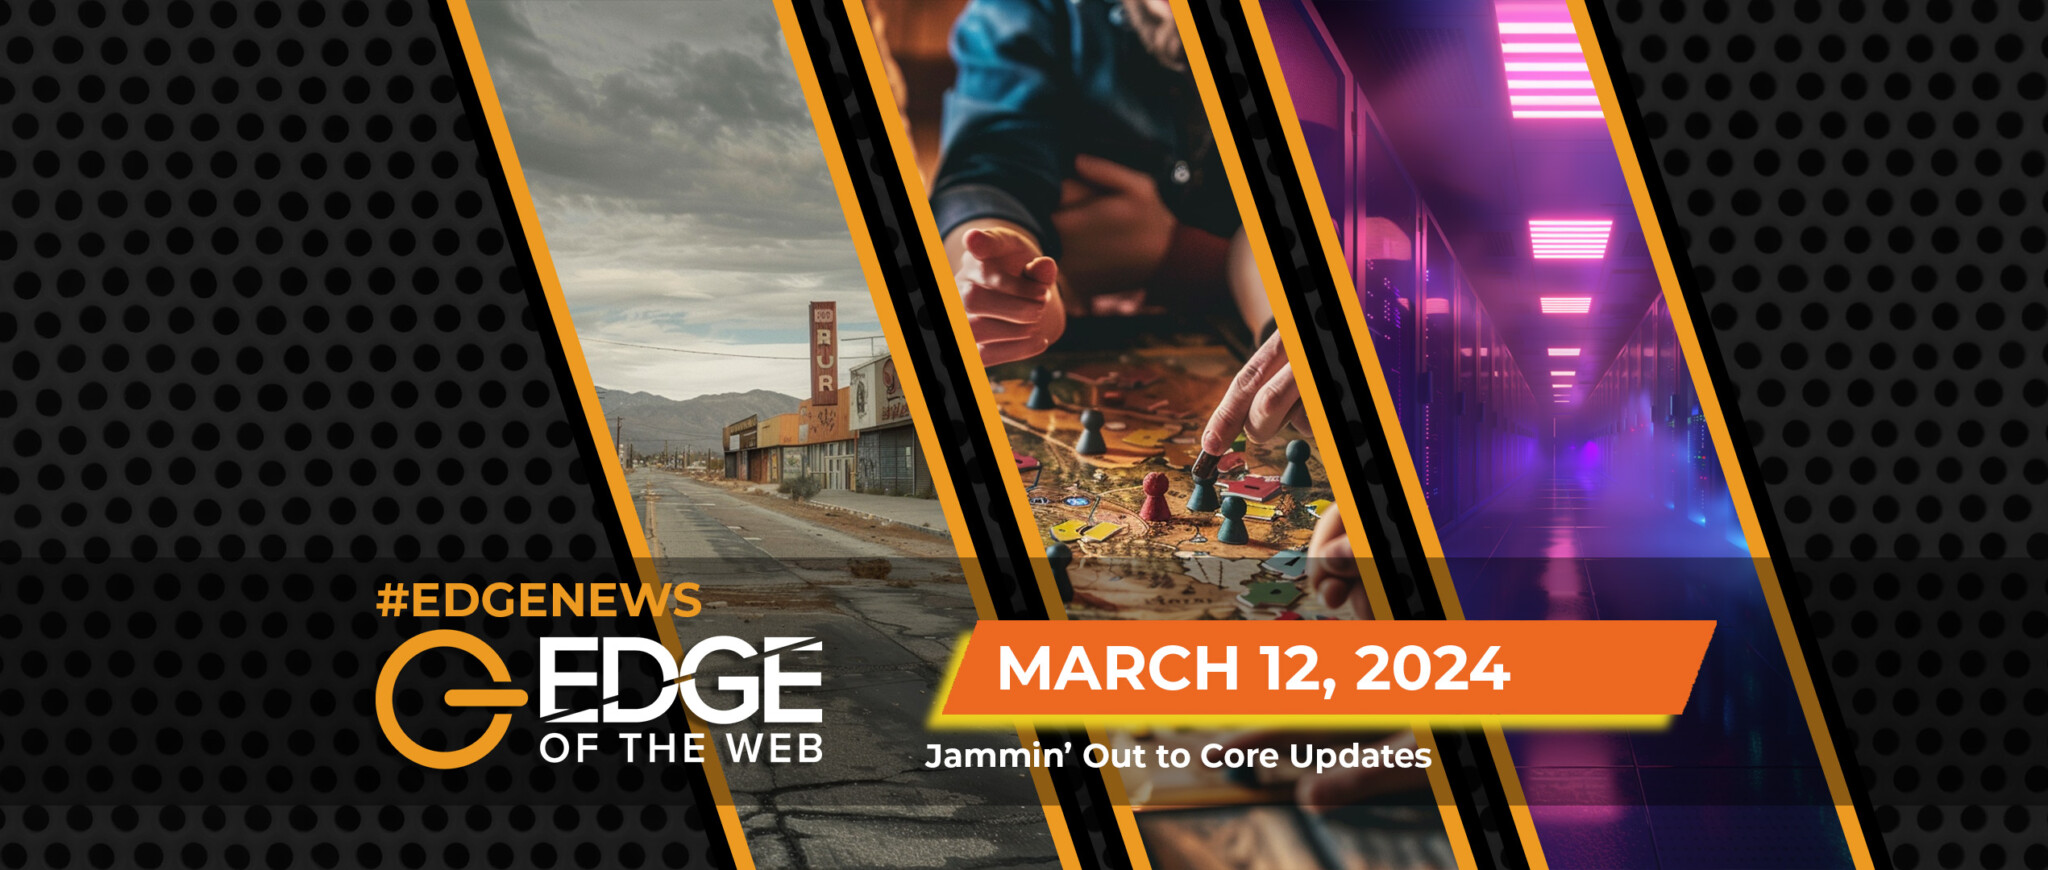 669 | News from the EDGE | Week of 3.11.2024